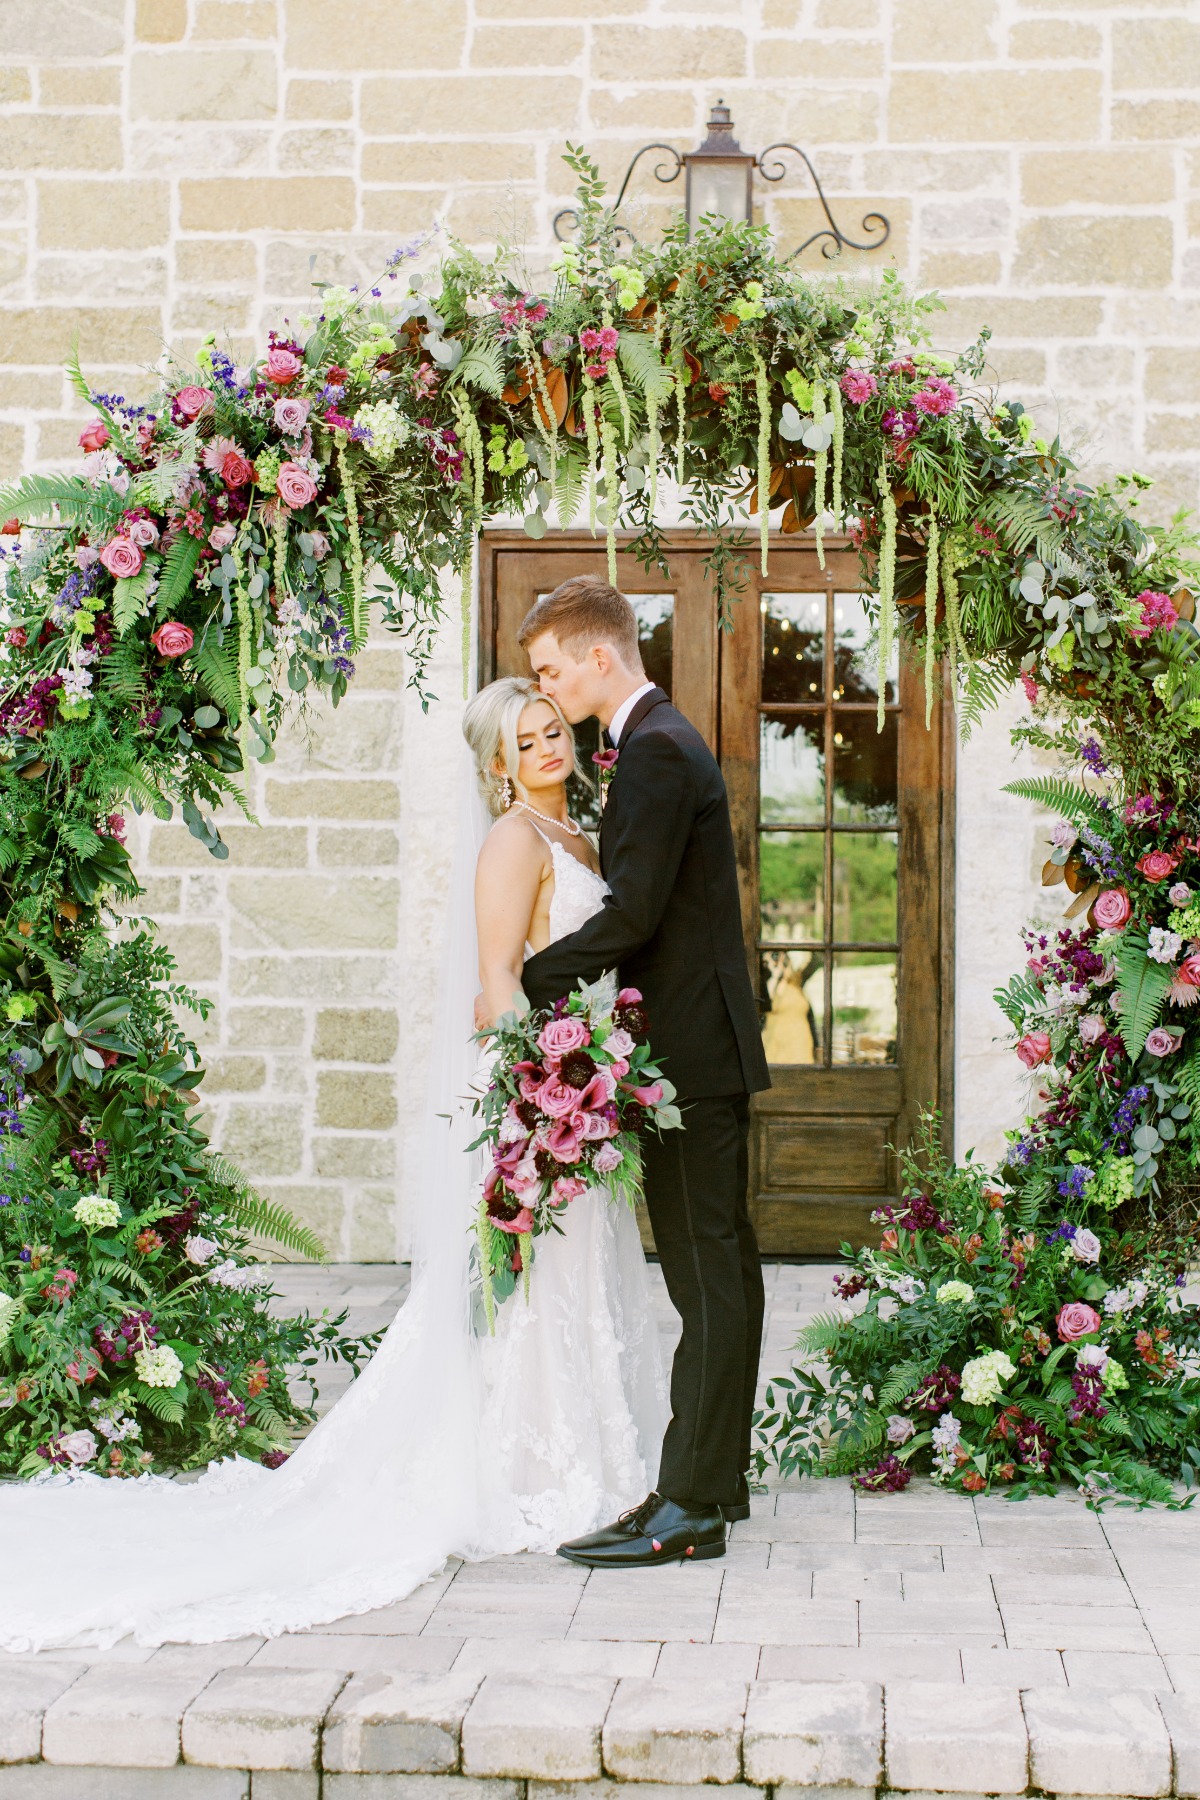 Bride and Groom Under Floral Arch